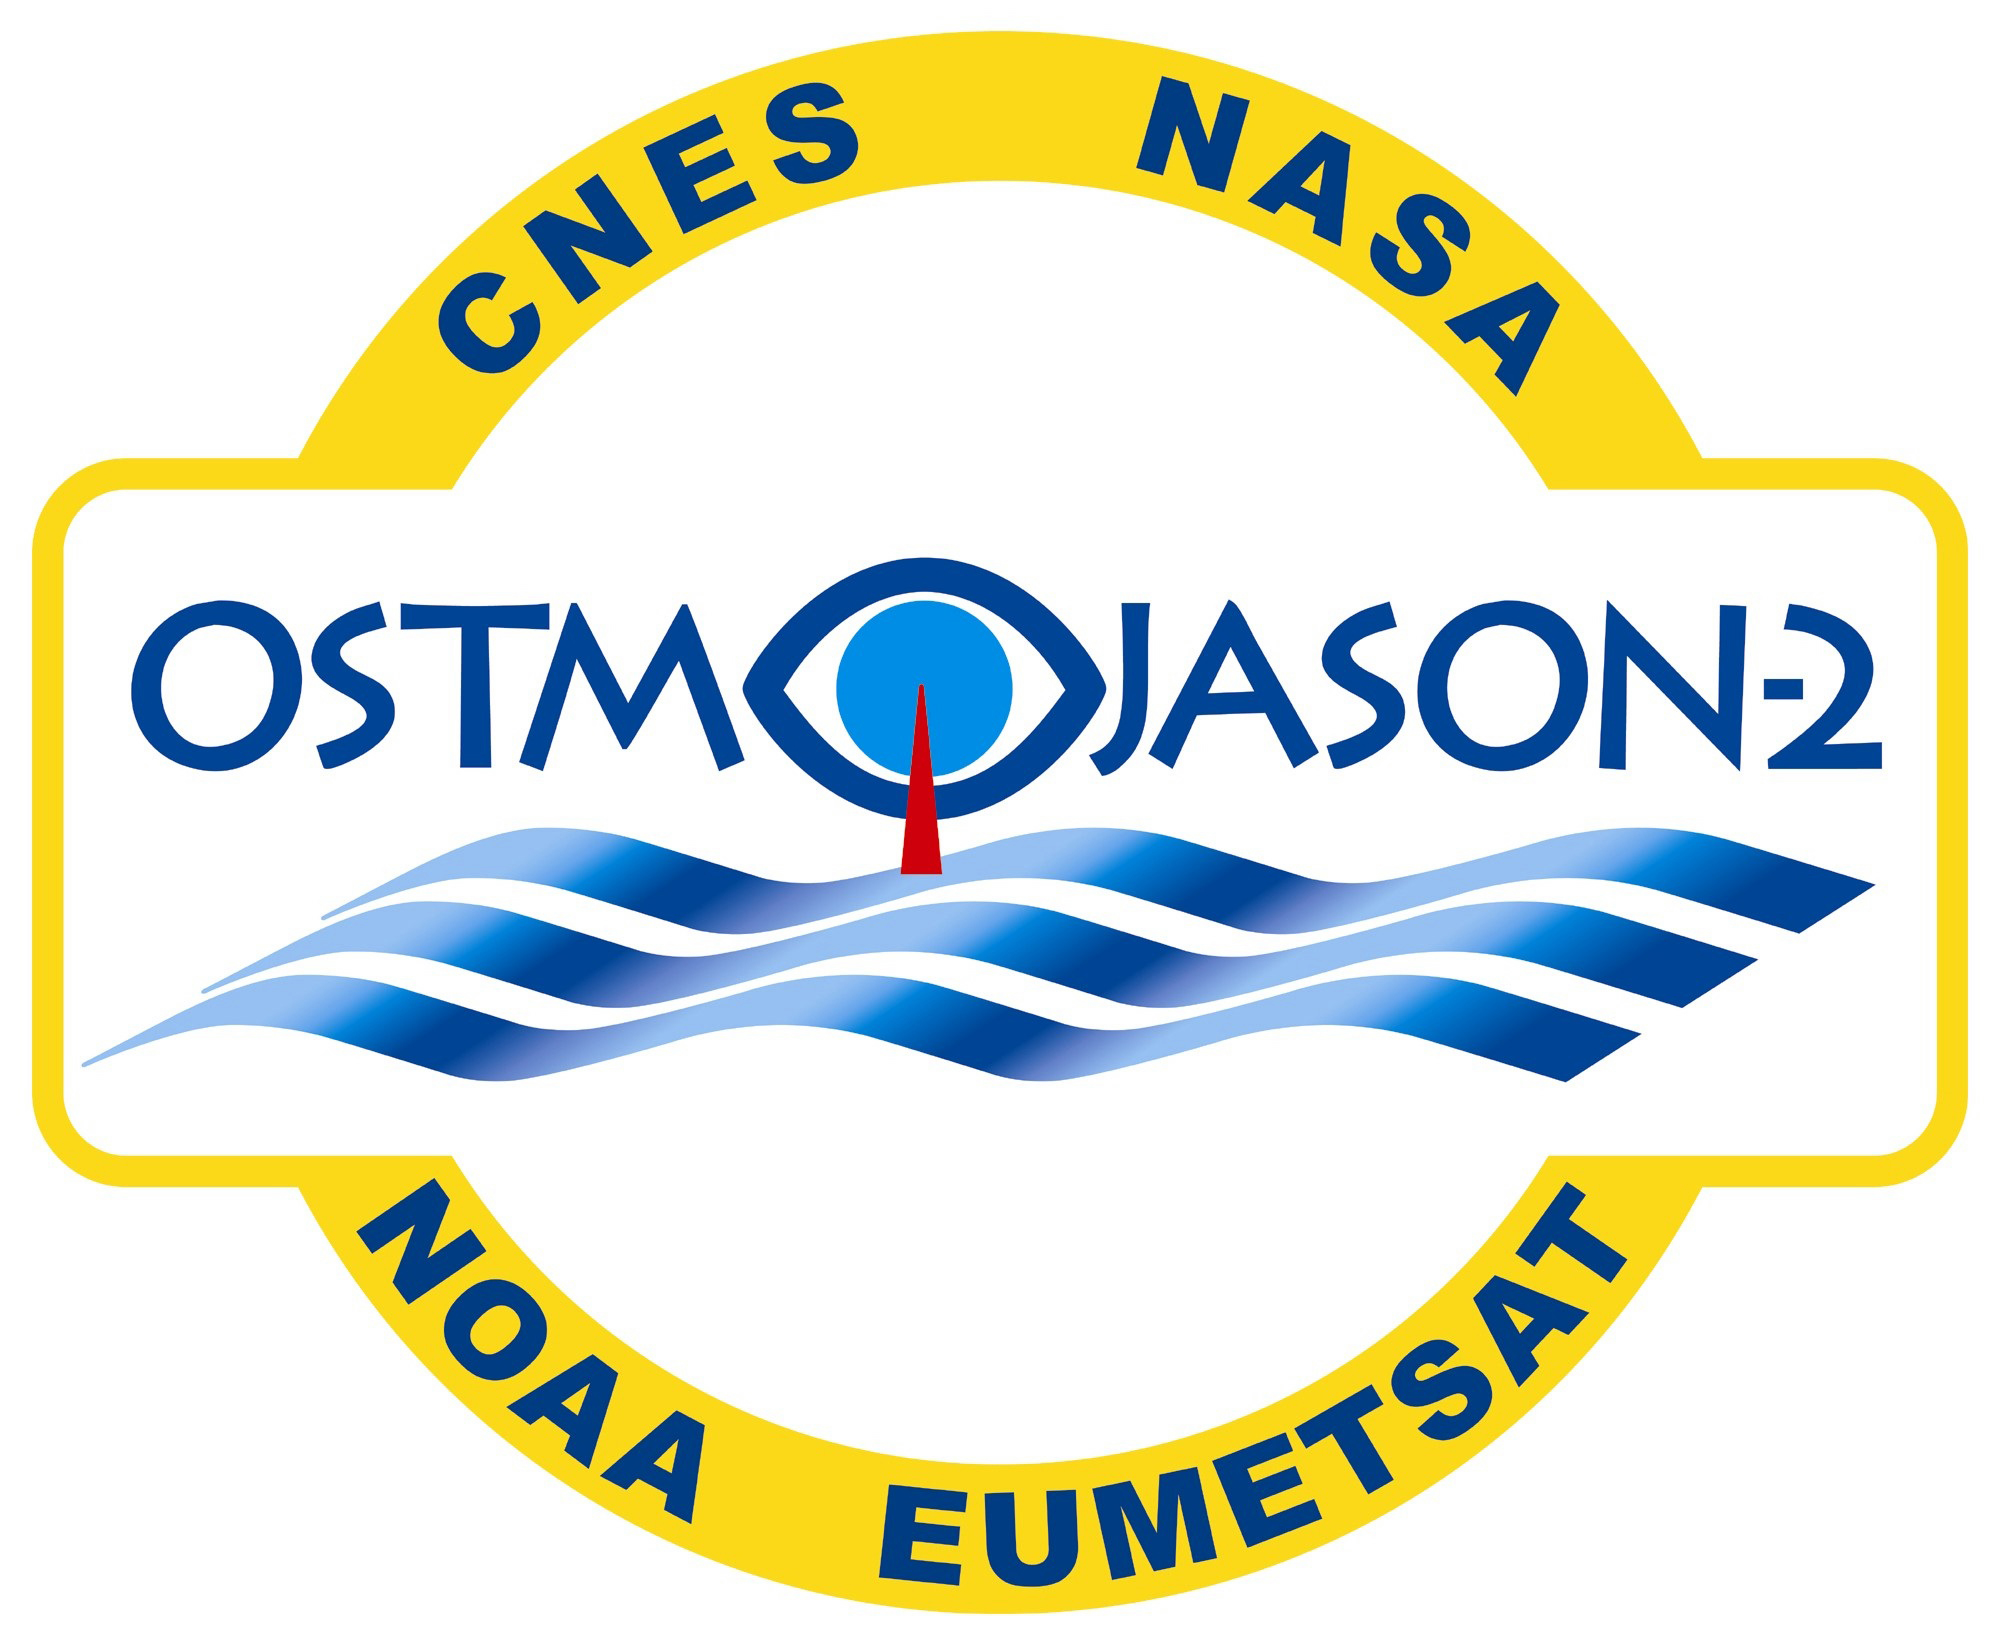 OSTM/Jason-2 insignia for launch vehicle